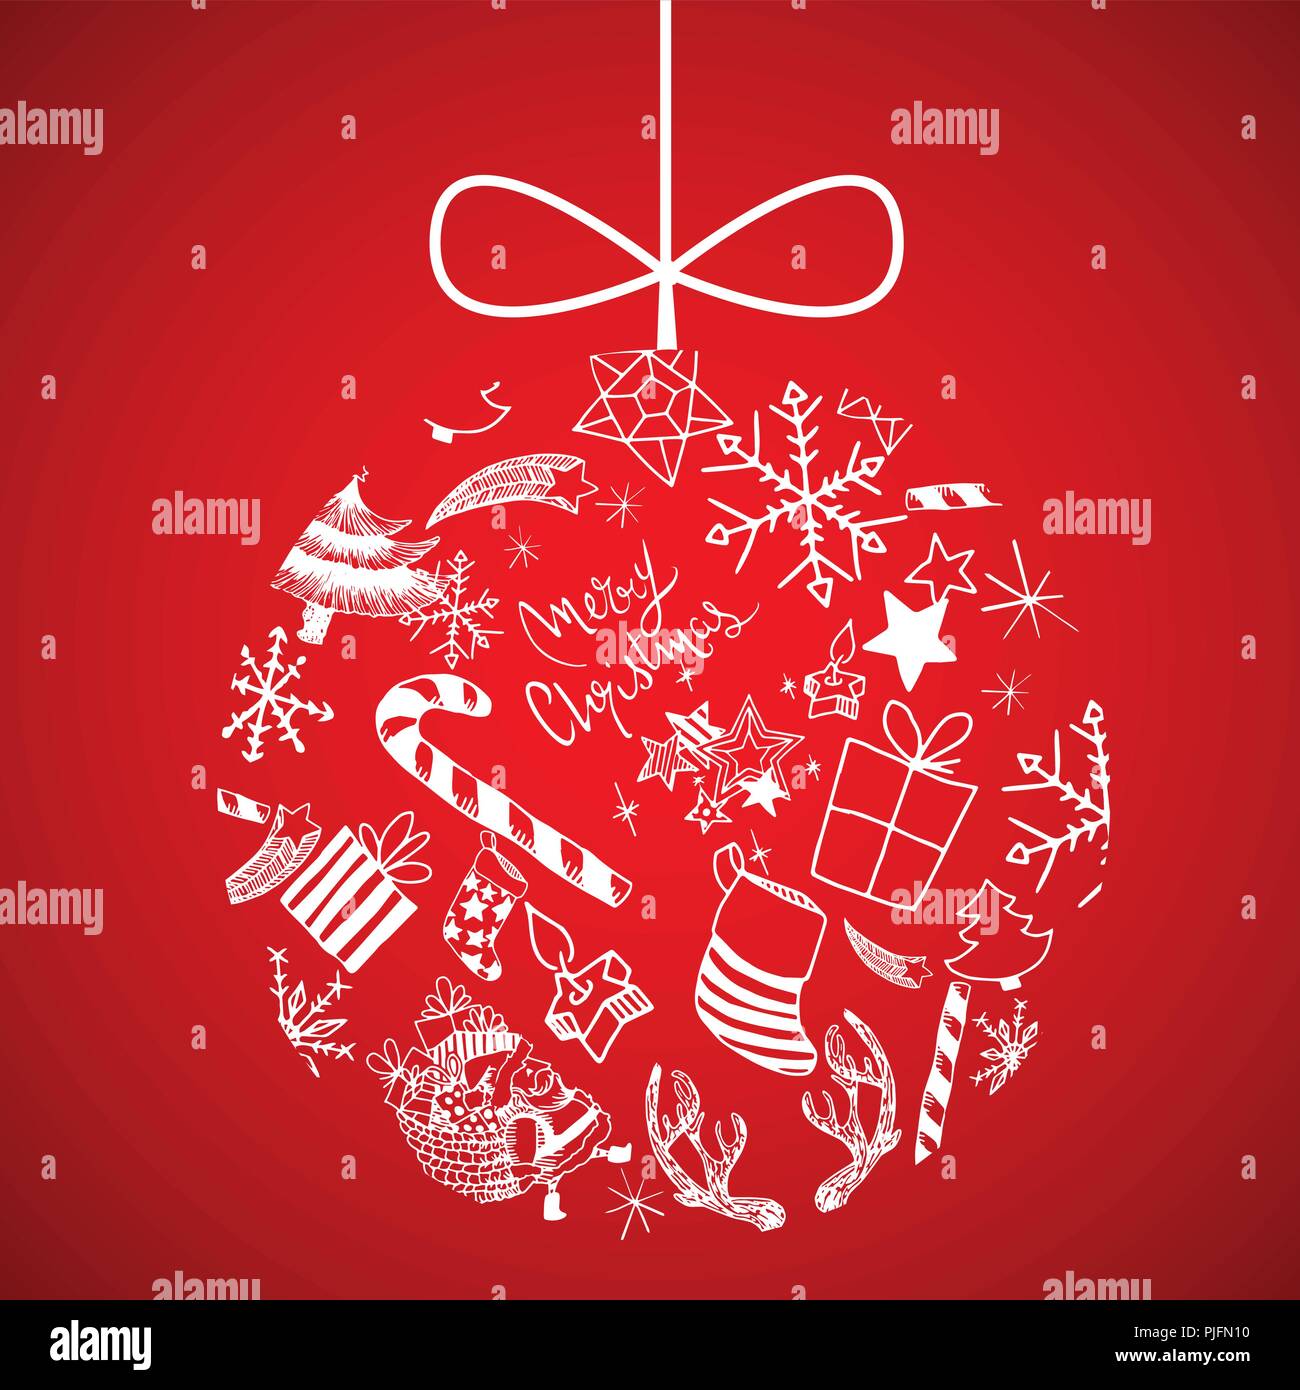 Sweet vector christmas ball illustrated with doodles Stock Vector